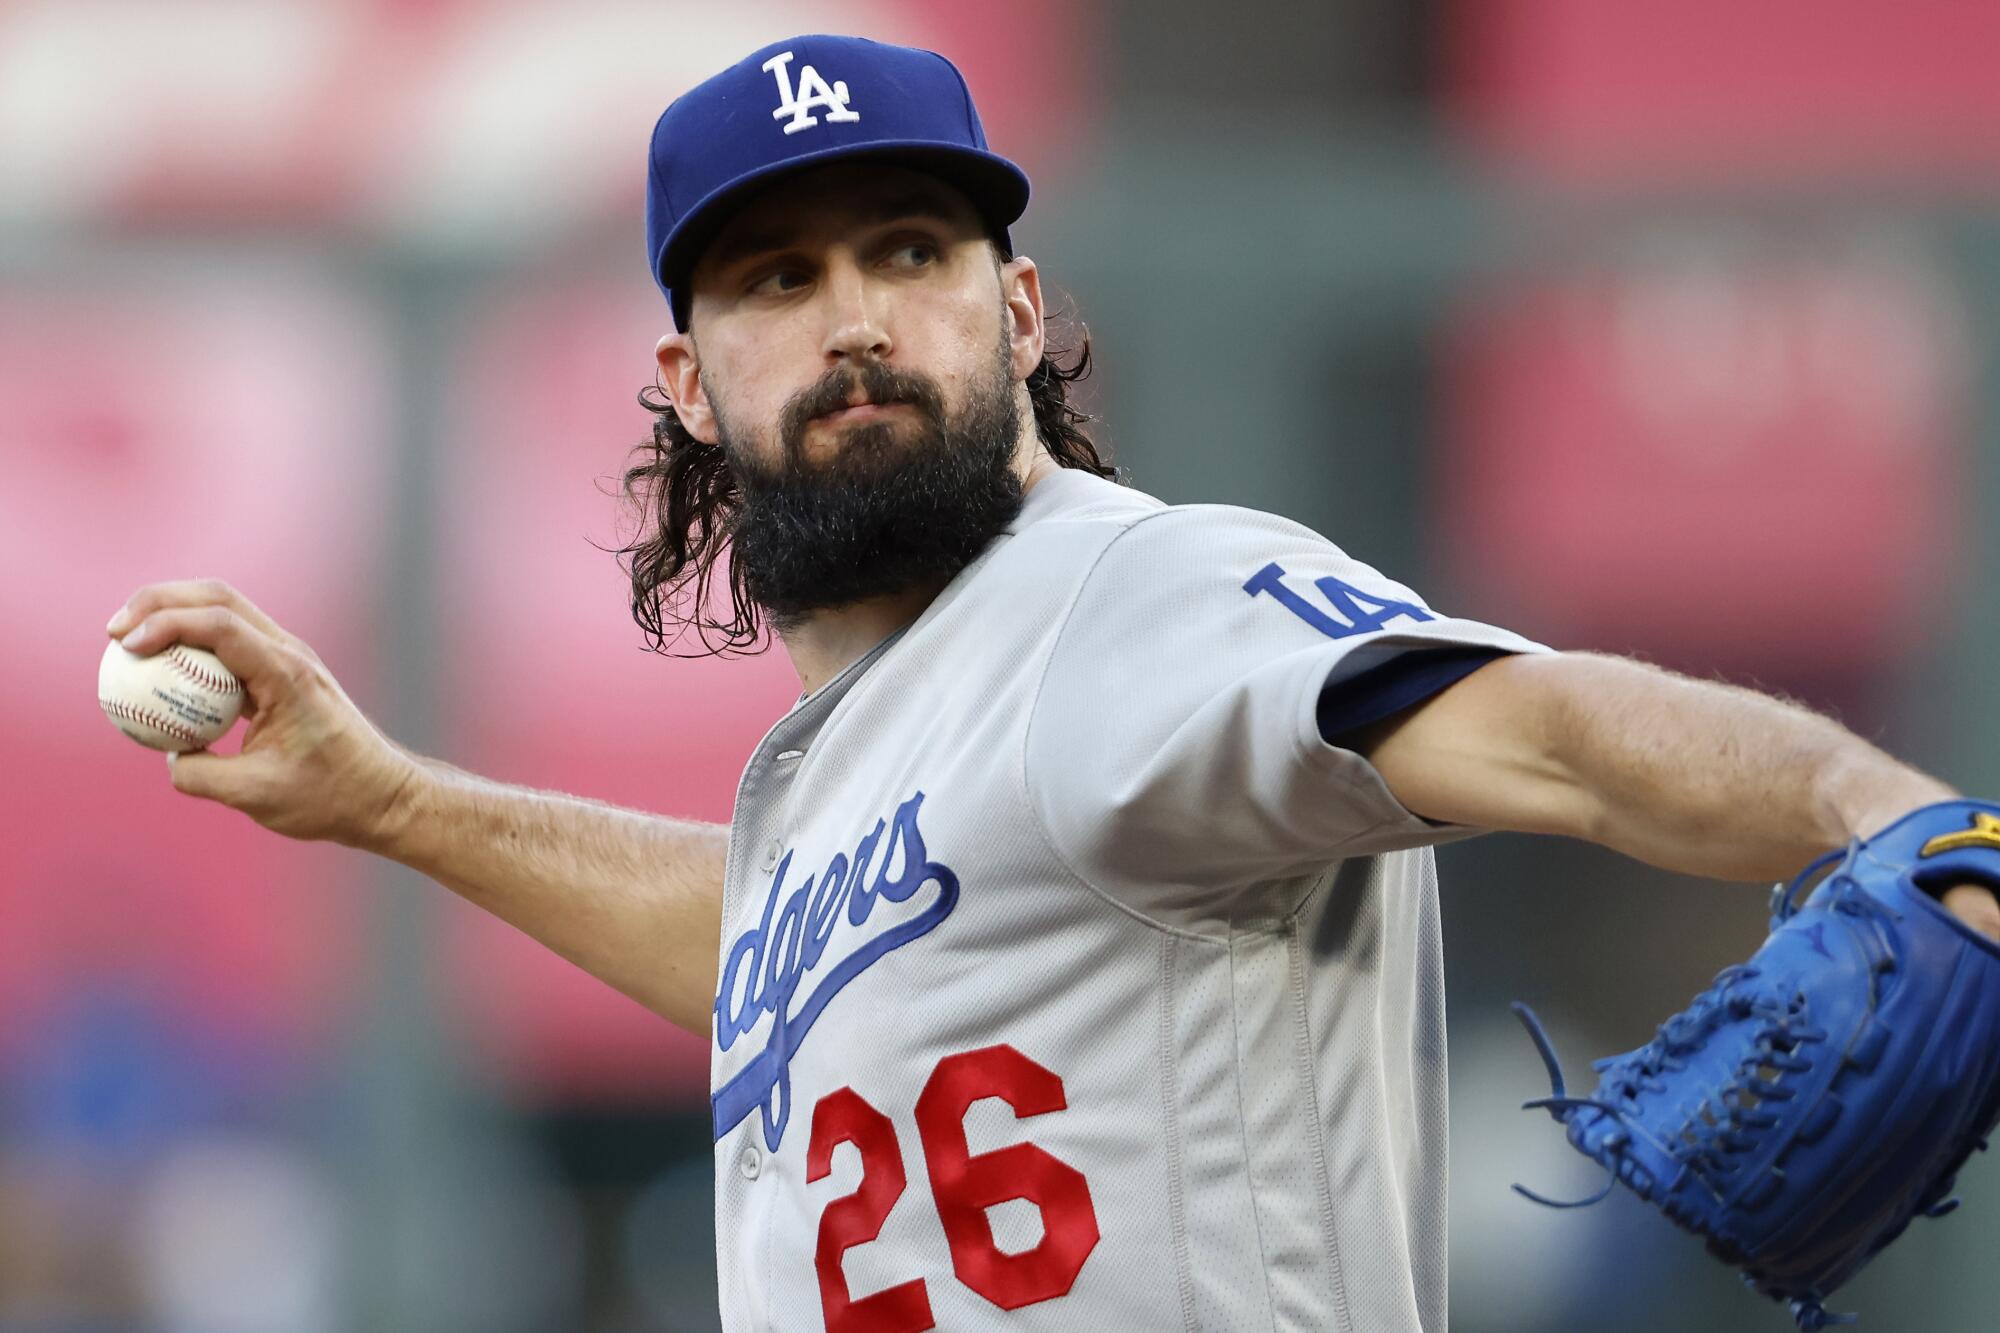 Tony Gonsolin remained sidelined at Dodgers camp with a sprained ankle. (AP Photo/Colin E. Braley)